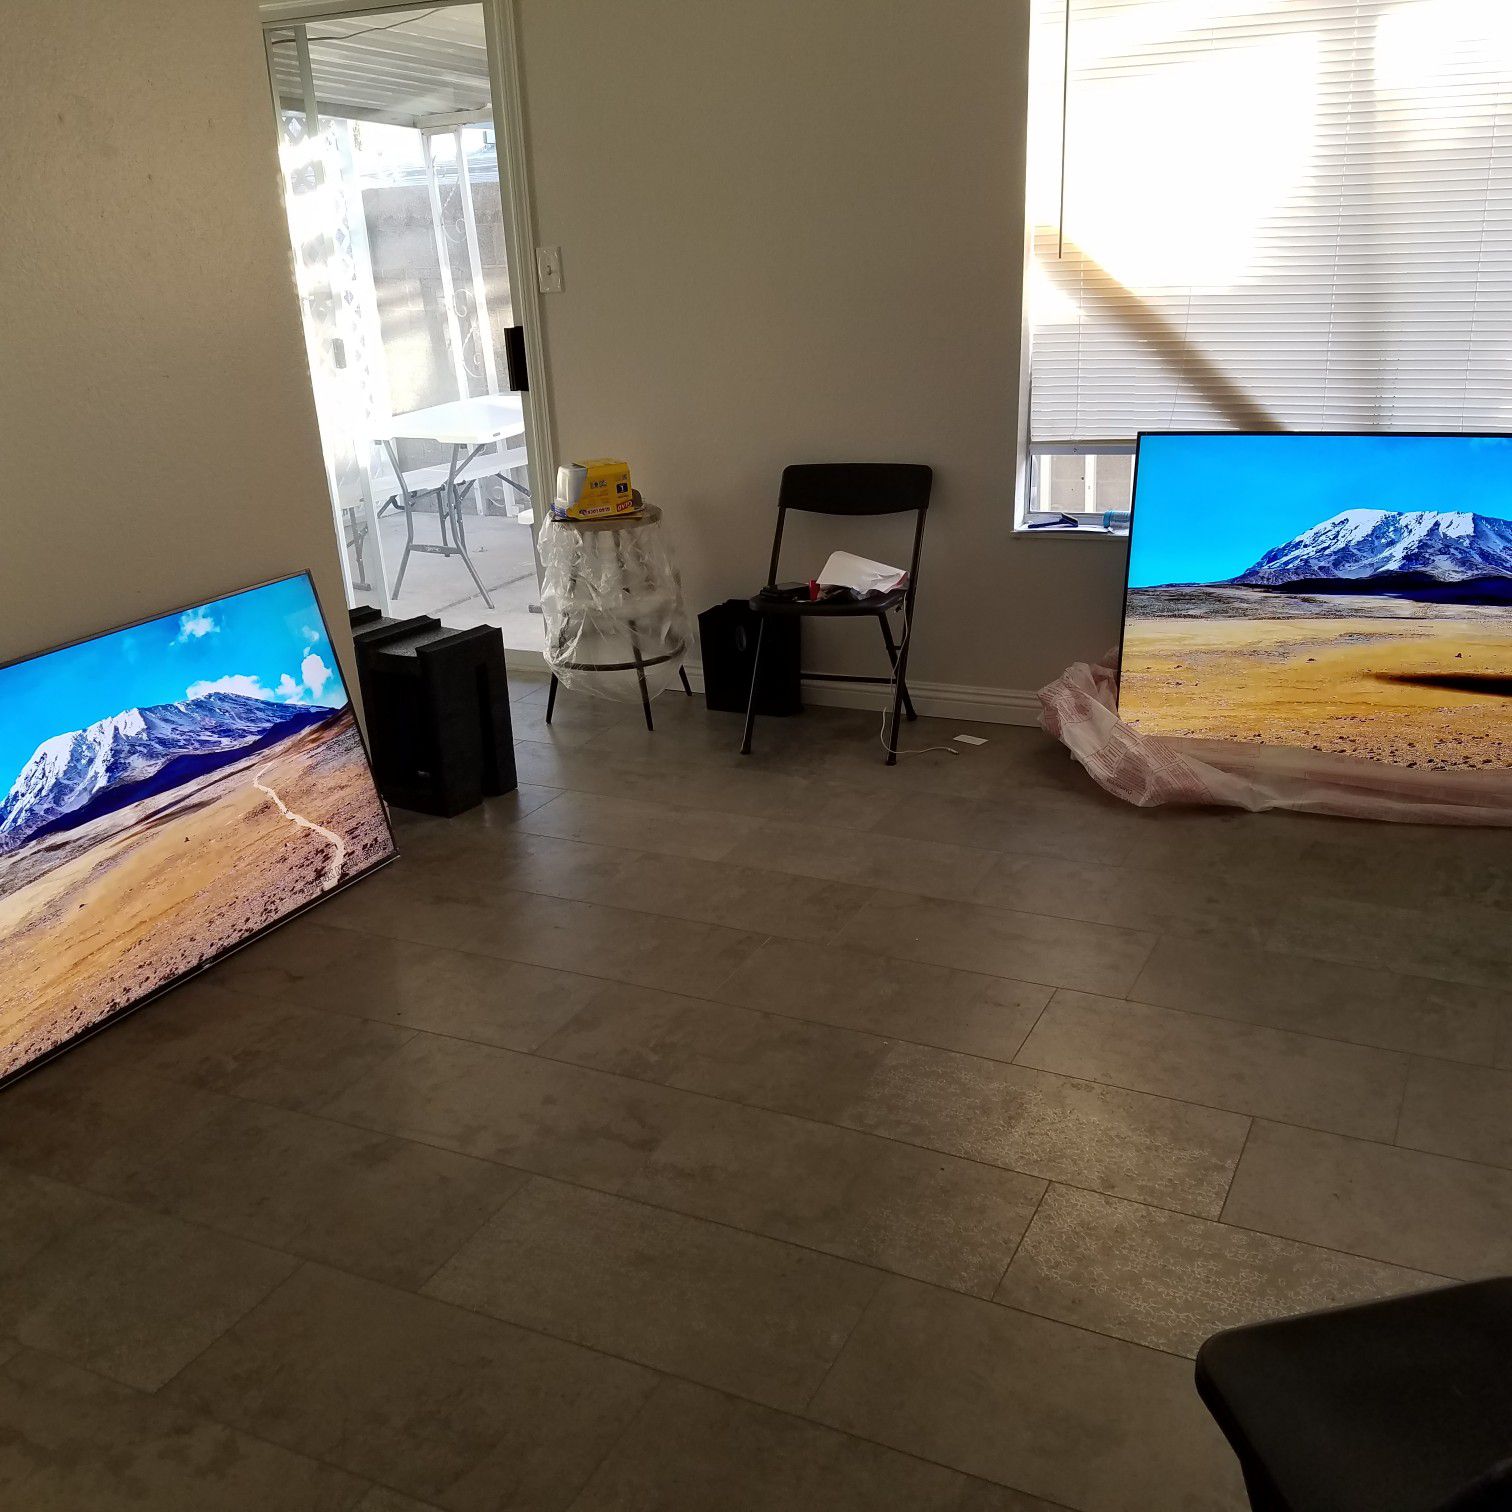 SONY 43" 800G AND 49" 900F BOTH FOR 530.00 FIRM